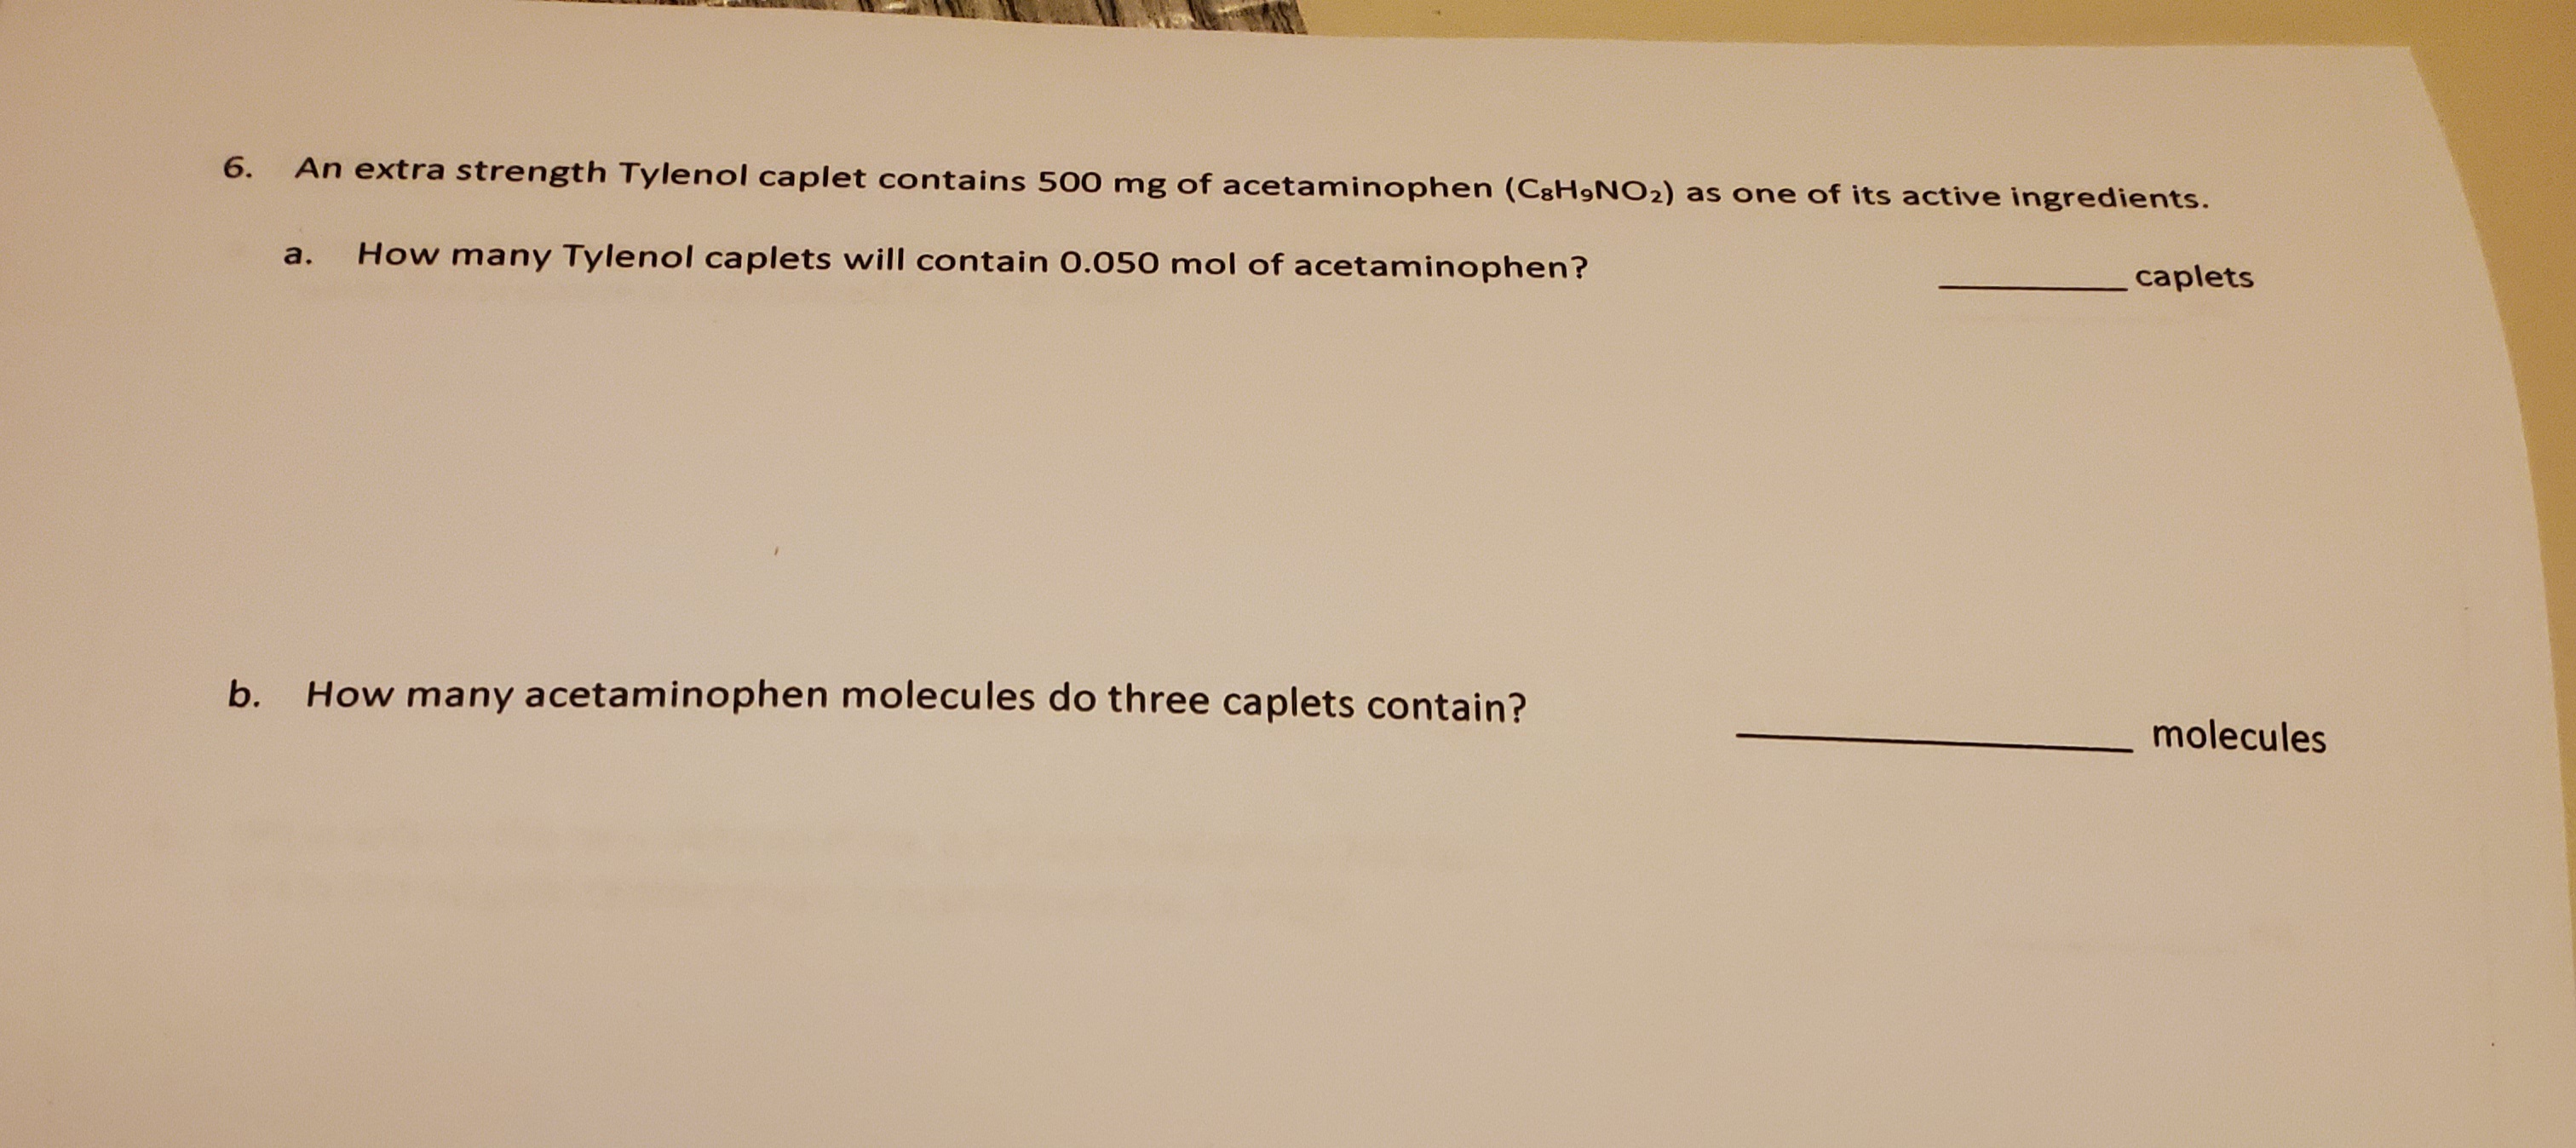 An extra strength Tylenol caplet contains 500 mg of acetaminophen (C8H9NO2) as one of its active ingredients.
caplets
How many Tylenol caplets will contain 0.050 mol of acetaminophen?
a.
How many acetaminophen molecules do three caplets contain?
molecules
